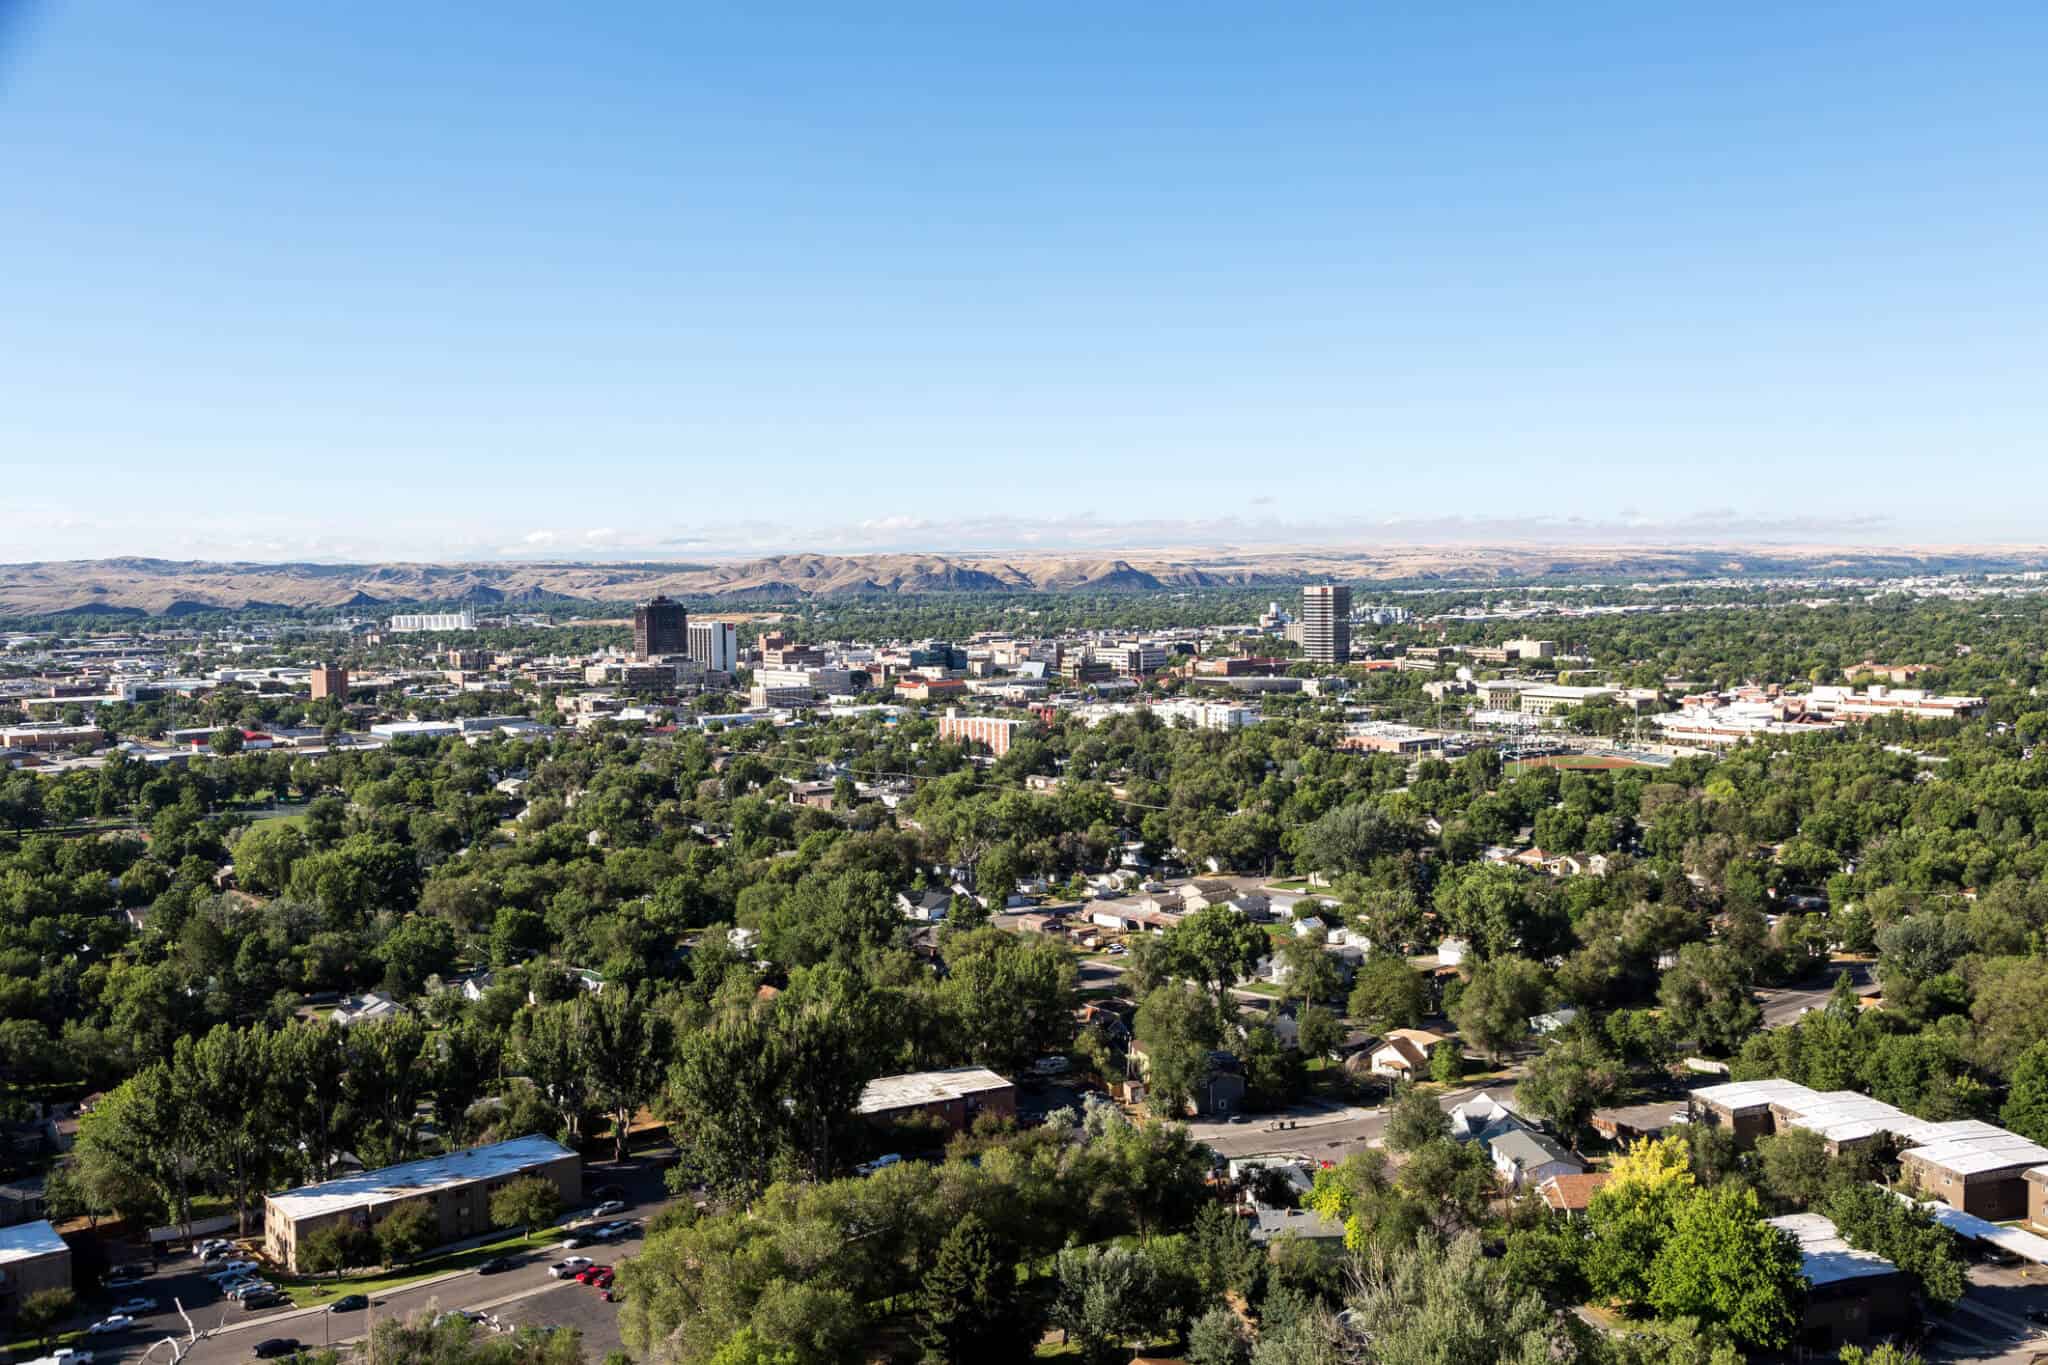 The skyline of Billings Montana as seen on a clear summer day.